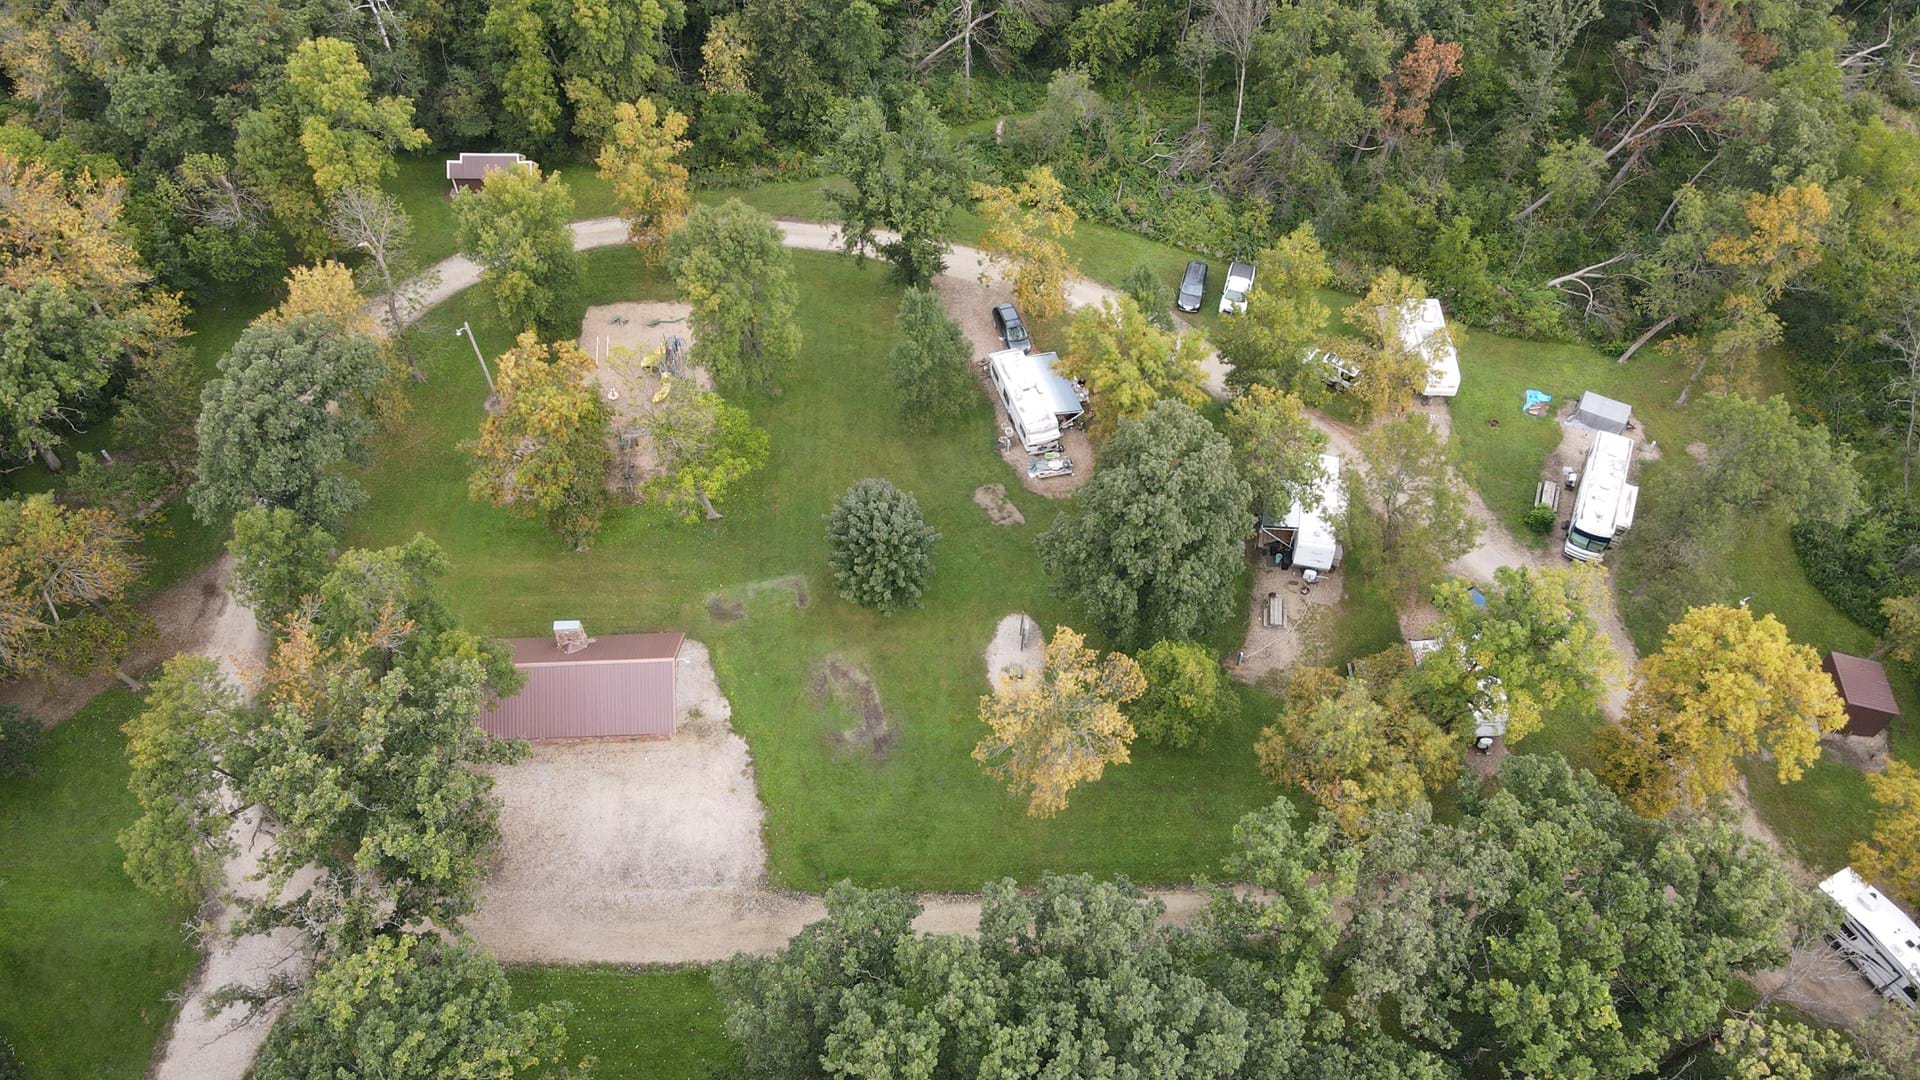 overhead view of campground looking north